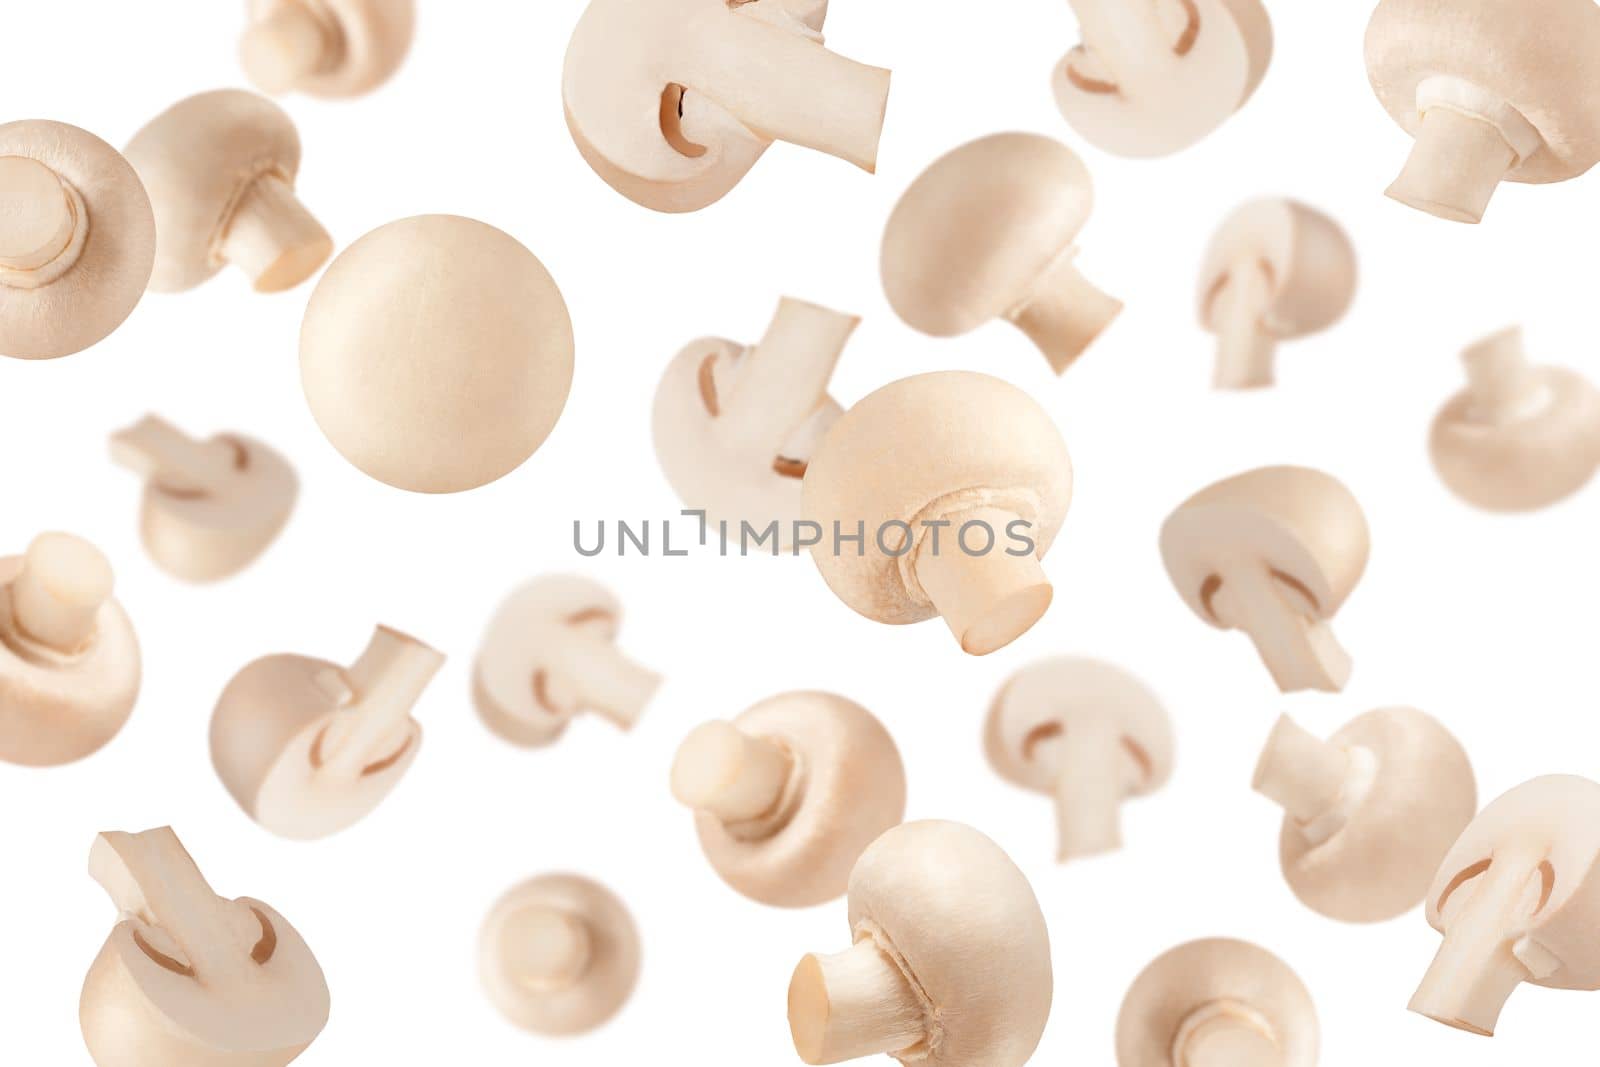 Creative levitation pattern with mushroom. Selective focus. Isolated vegetables. Packaging concept. Clip art image for package design.